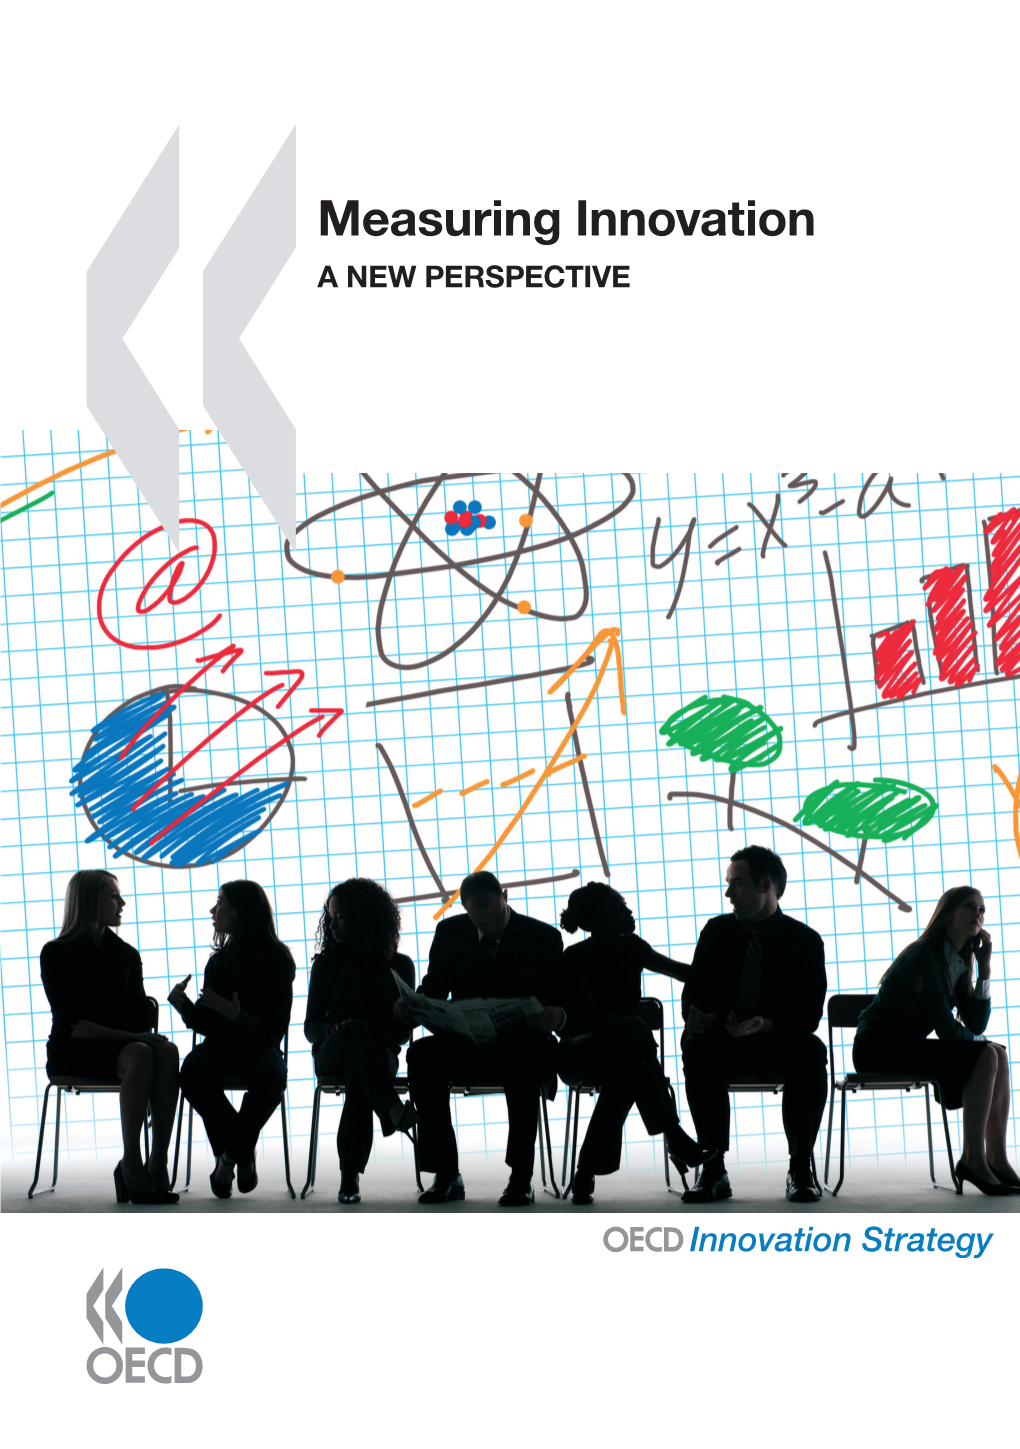 Measuring Innovation a NEW PERSPECTIVE Measuring Innovation: a New Perspective Presents New Measures and New Ways of Looking at Traditional Indicators